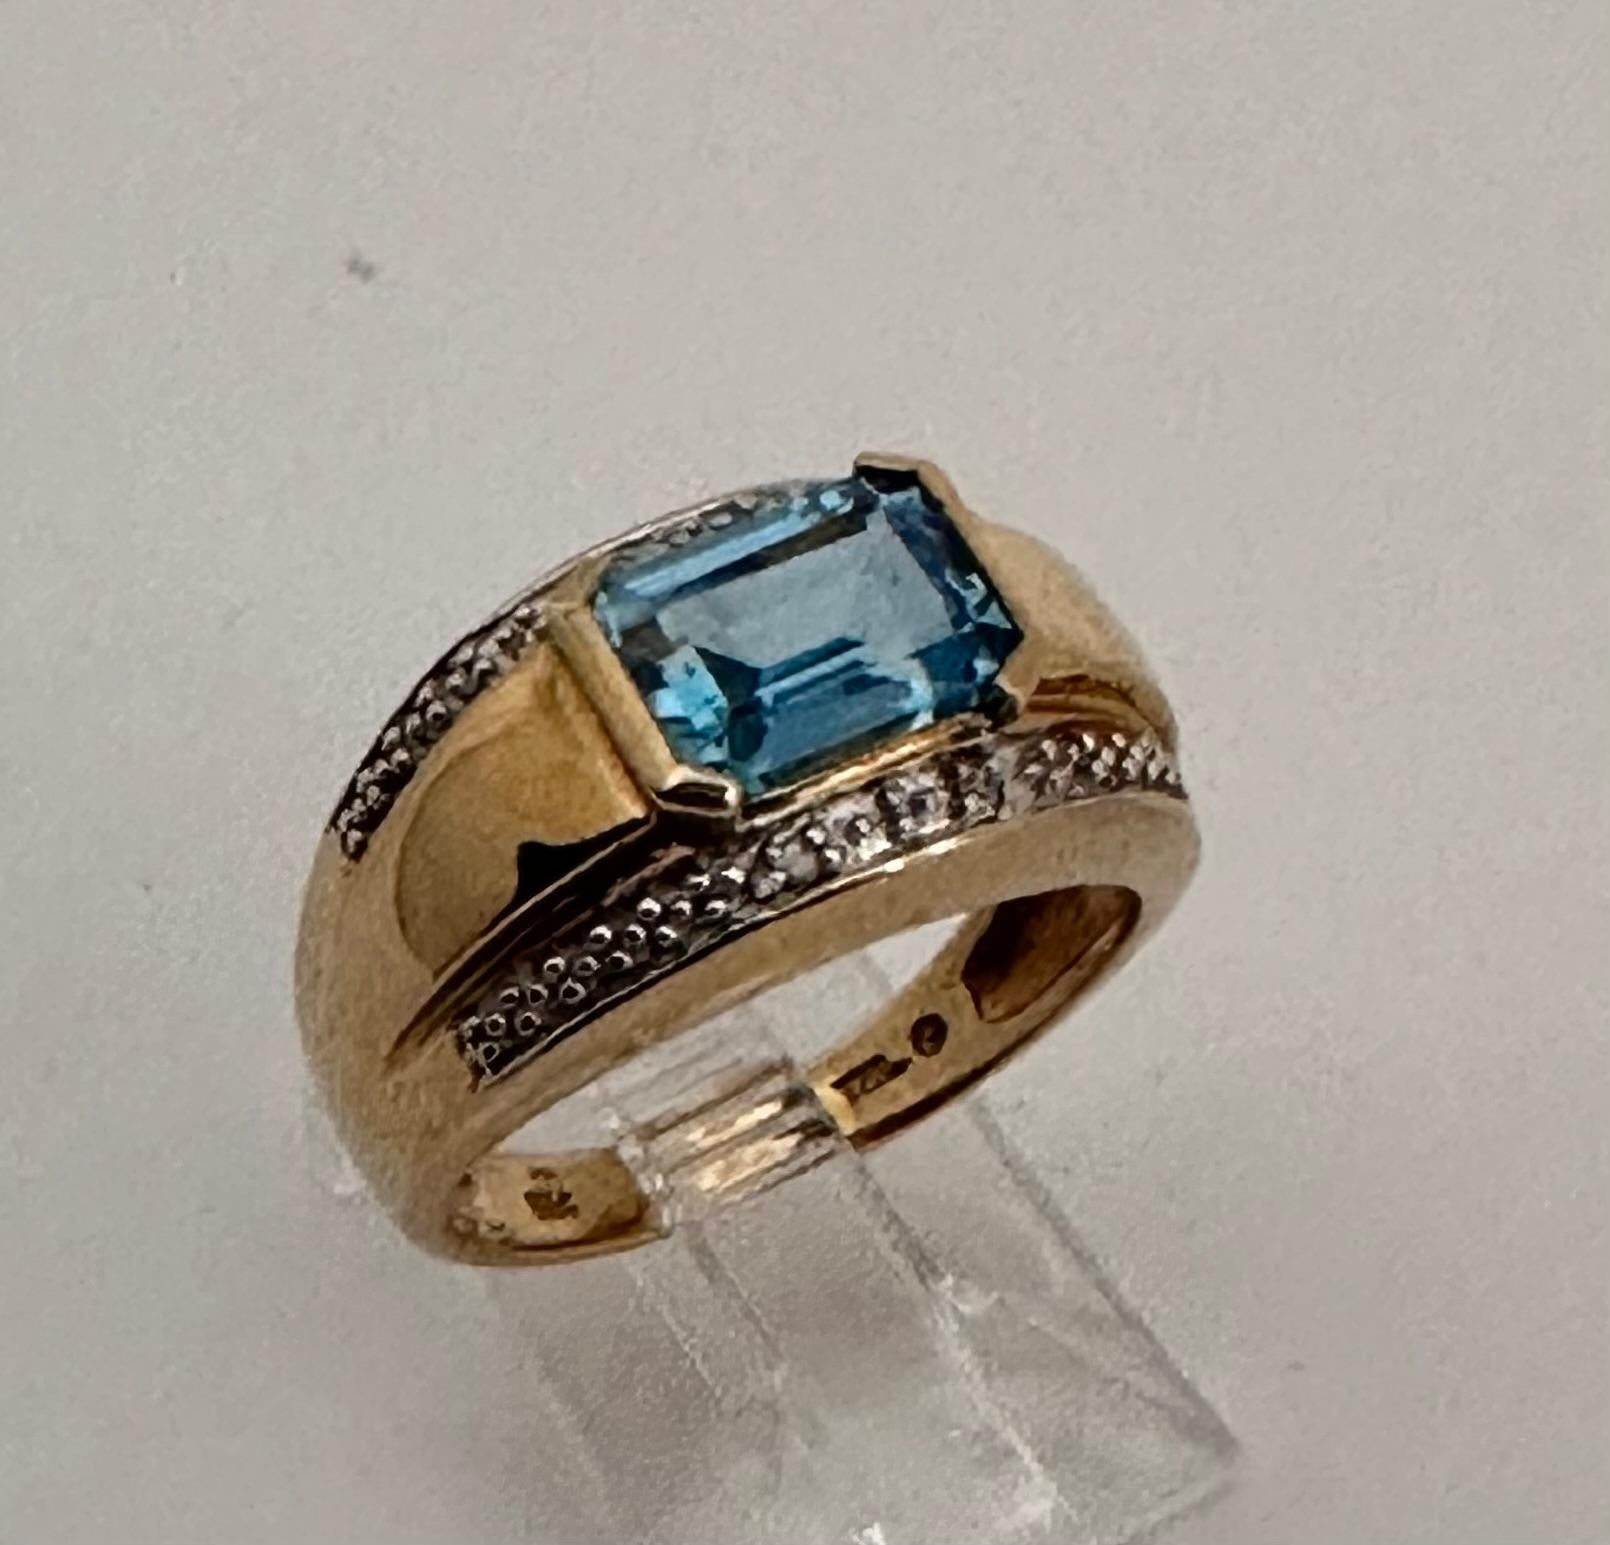 10k Yellow Gold 6mm x 8mm Emerald Cut Blue Topaz Diamond Ring Size 7 For Sale 6